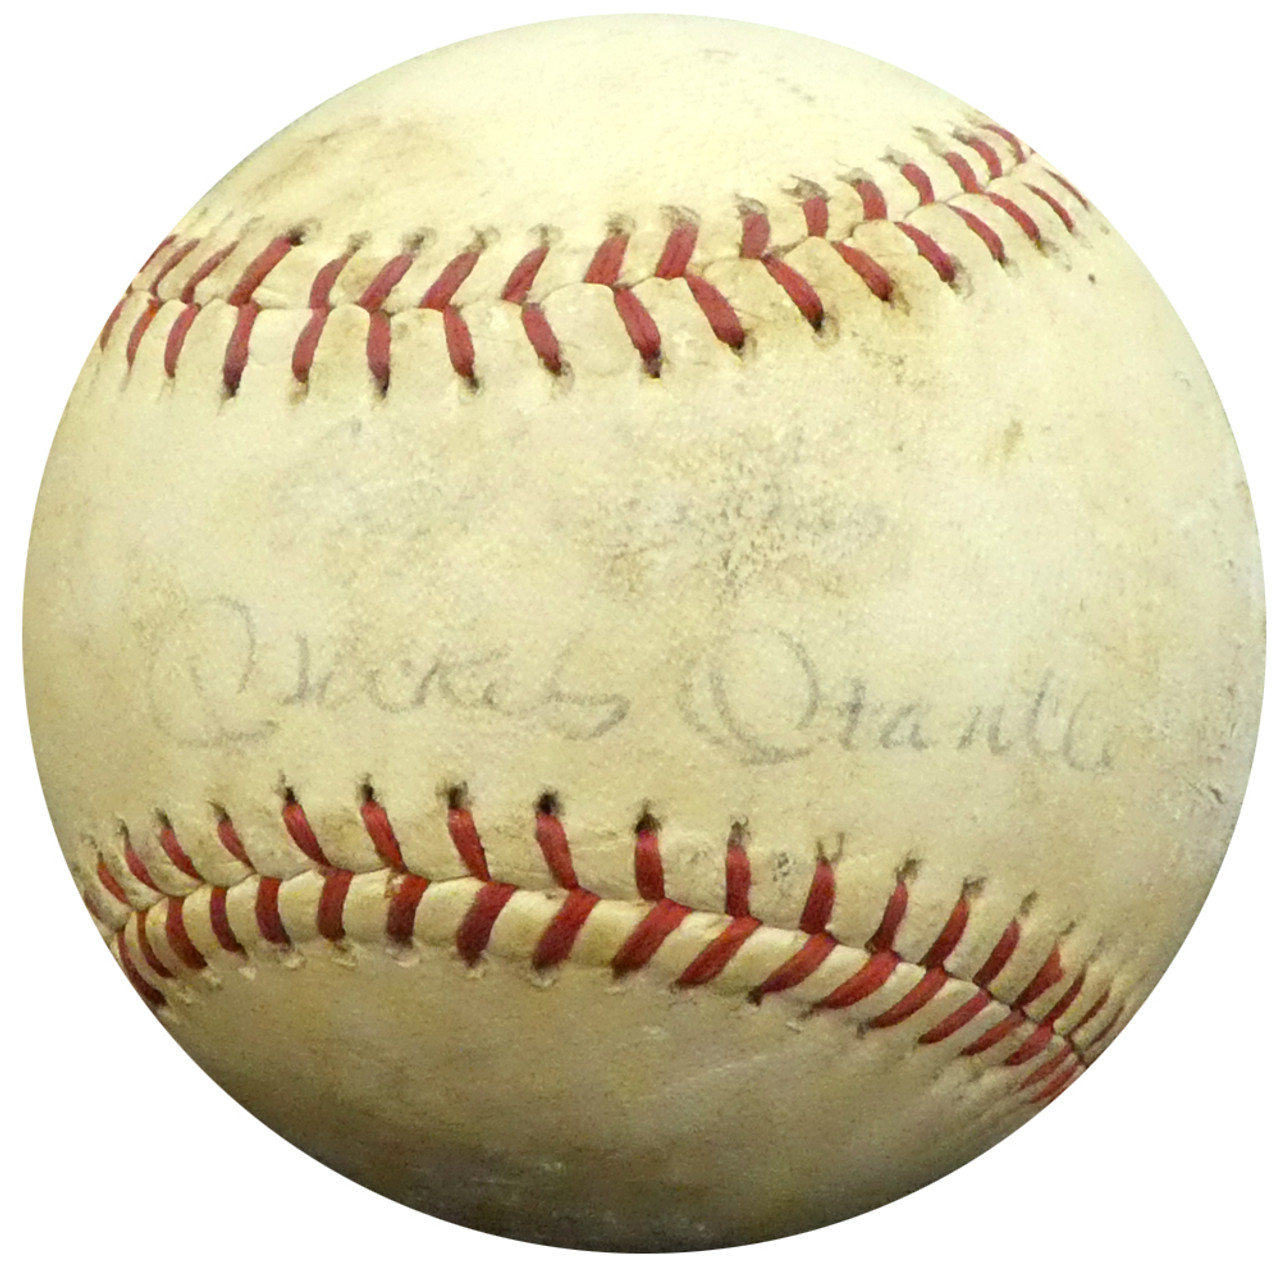 Sell or Auction Your 1950 New York Yankees Baseball Signed Autographs